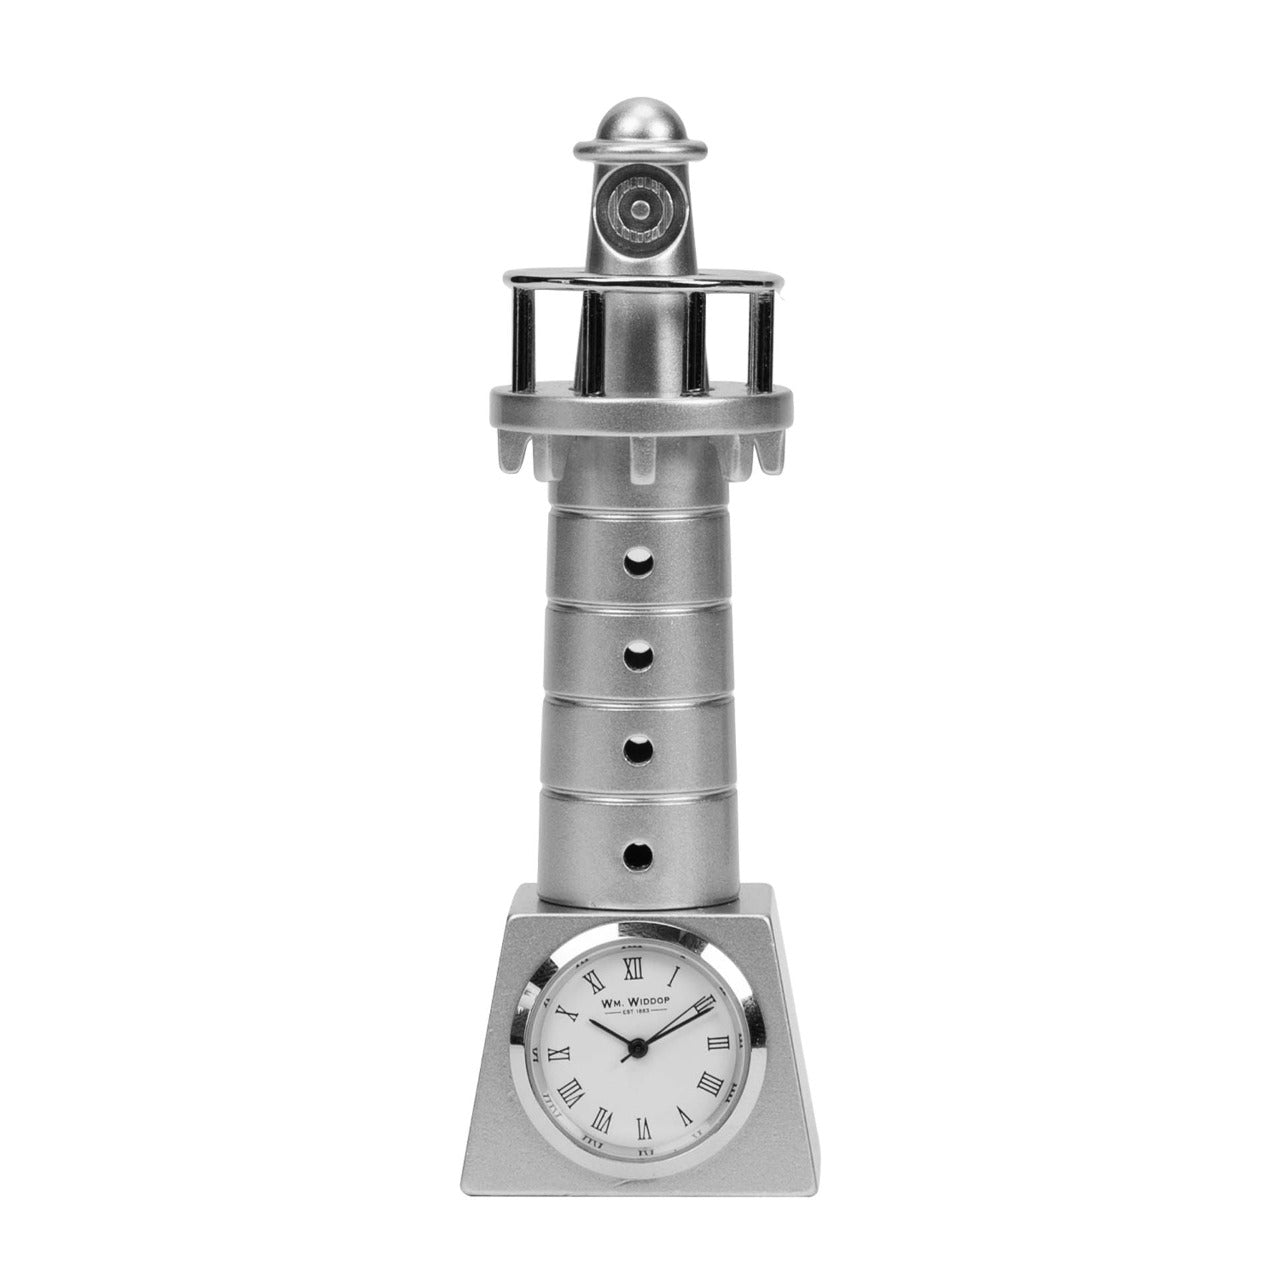 Miniature Lighthouse Clock  An intricately die-cast satin silver metal miniature lighthouse clock. From WILLIAM WIDDOP - over 130 years of unrivalled innovation and unbeatable quality in British timekeeping.